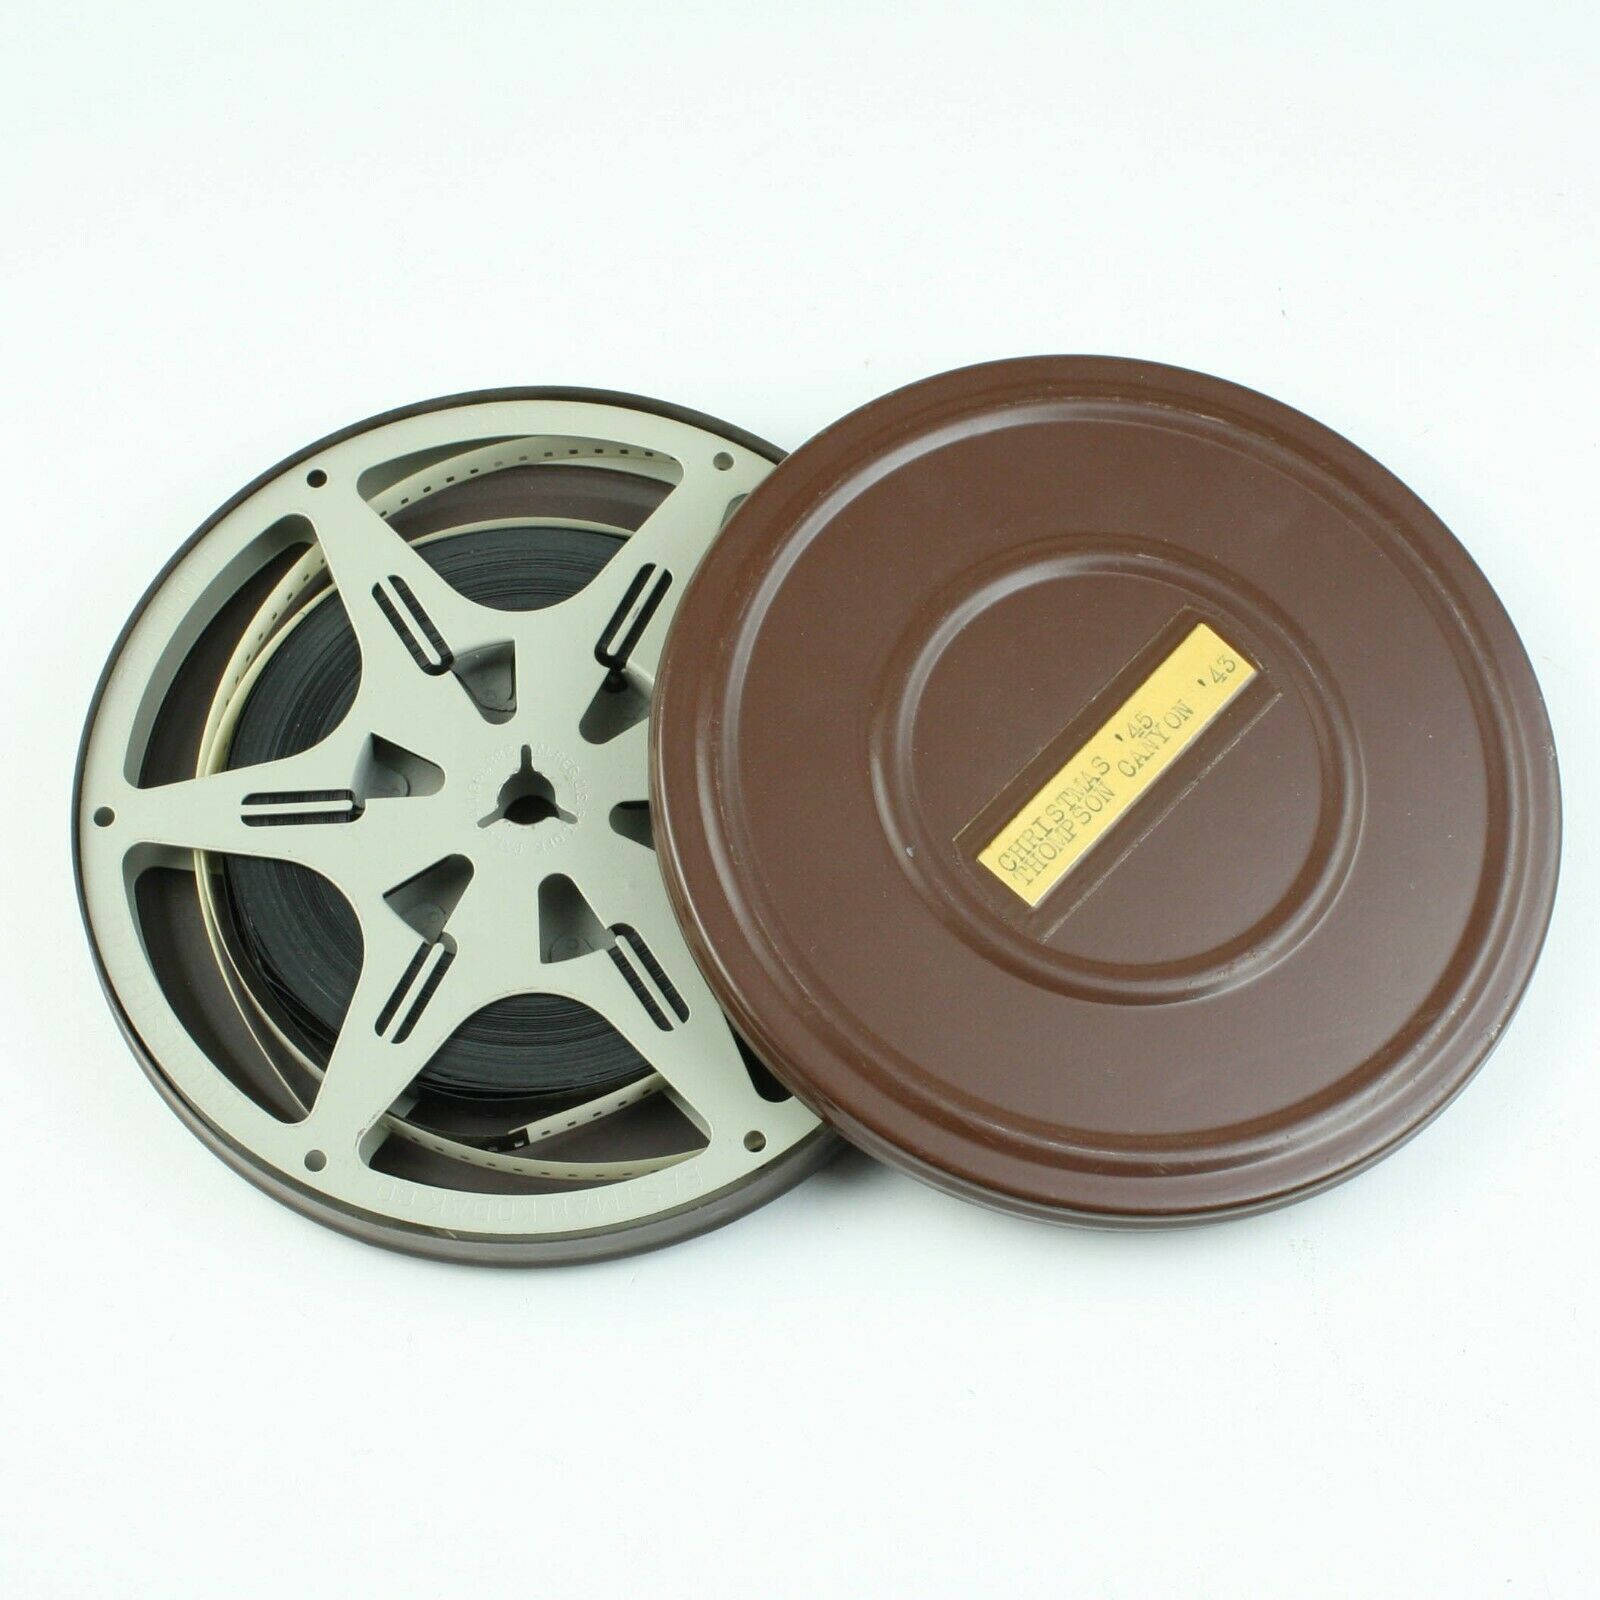 Homemade Christmas & Vacation - 1940's - 8mm Movie Film Reels